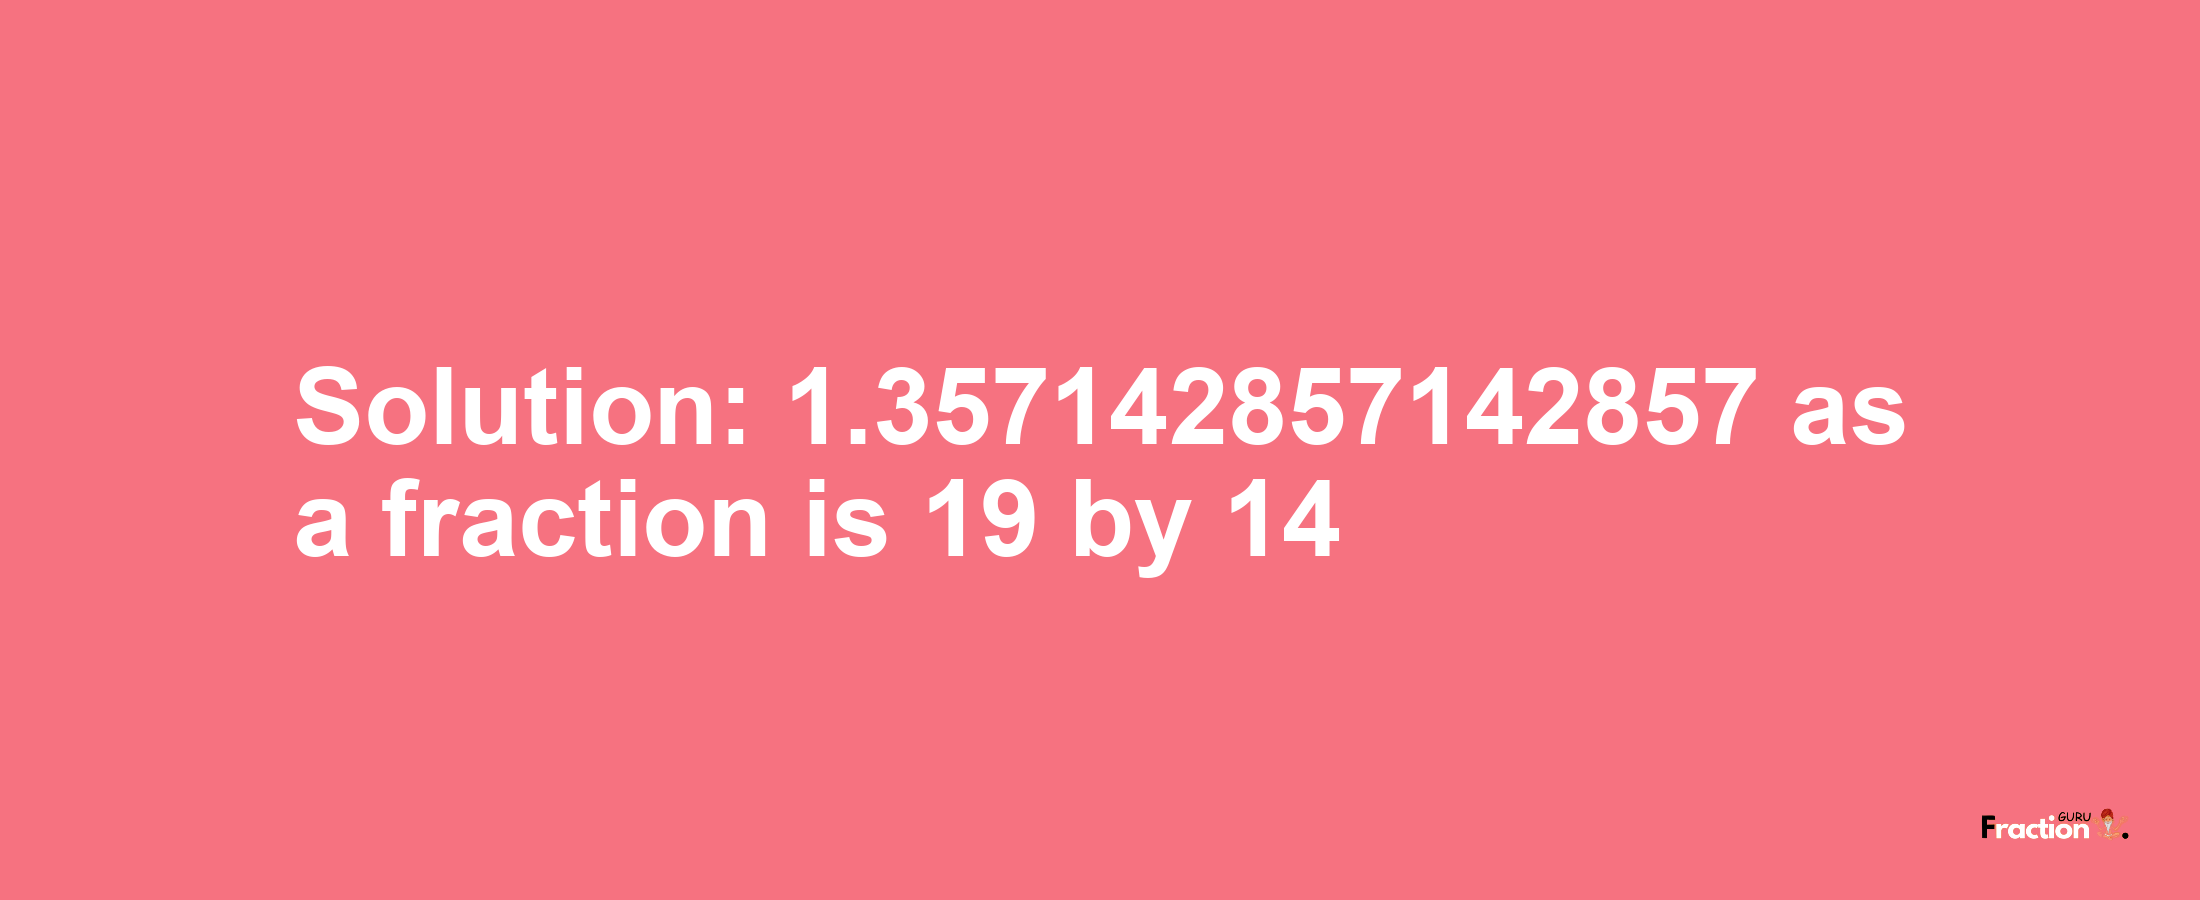 Solution:1.357142857142857 as a fraction is 19/14